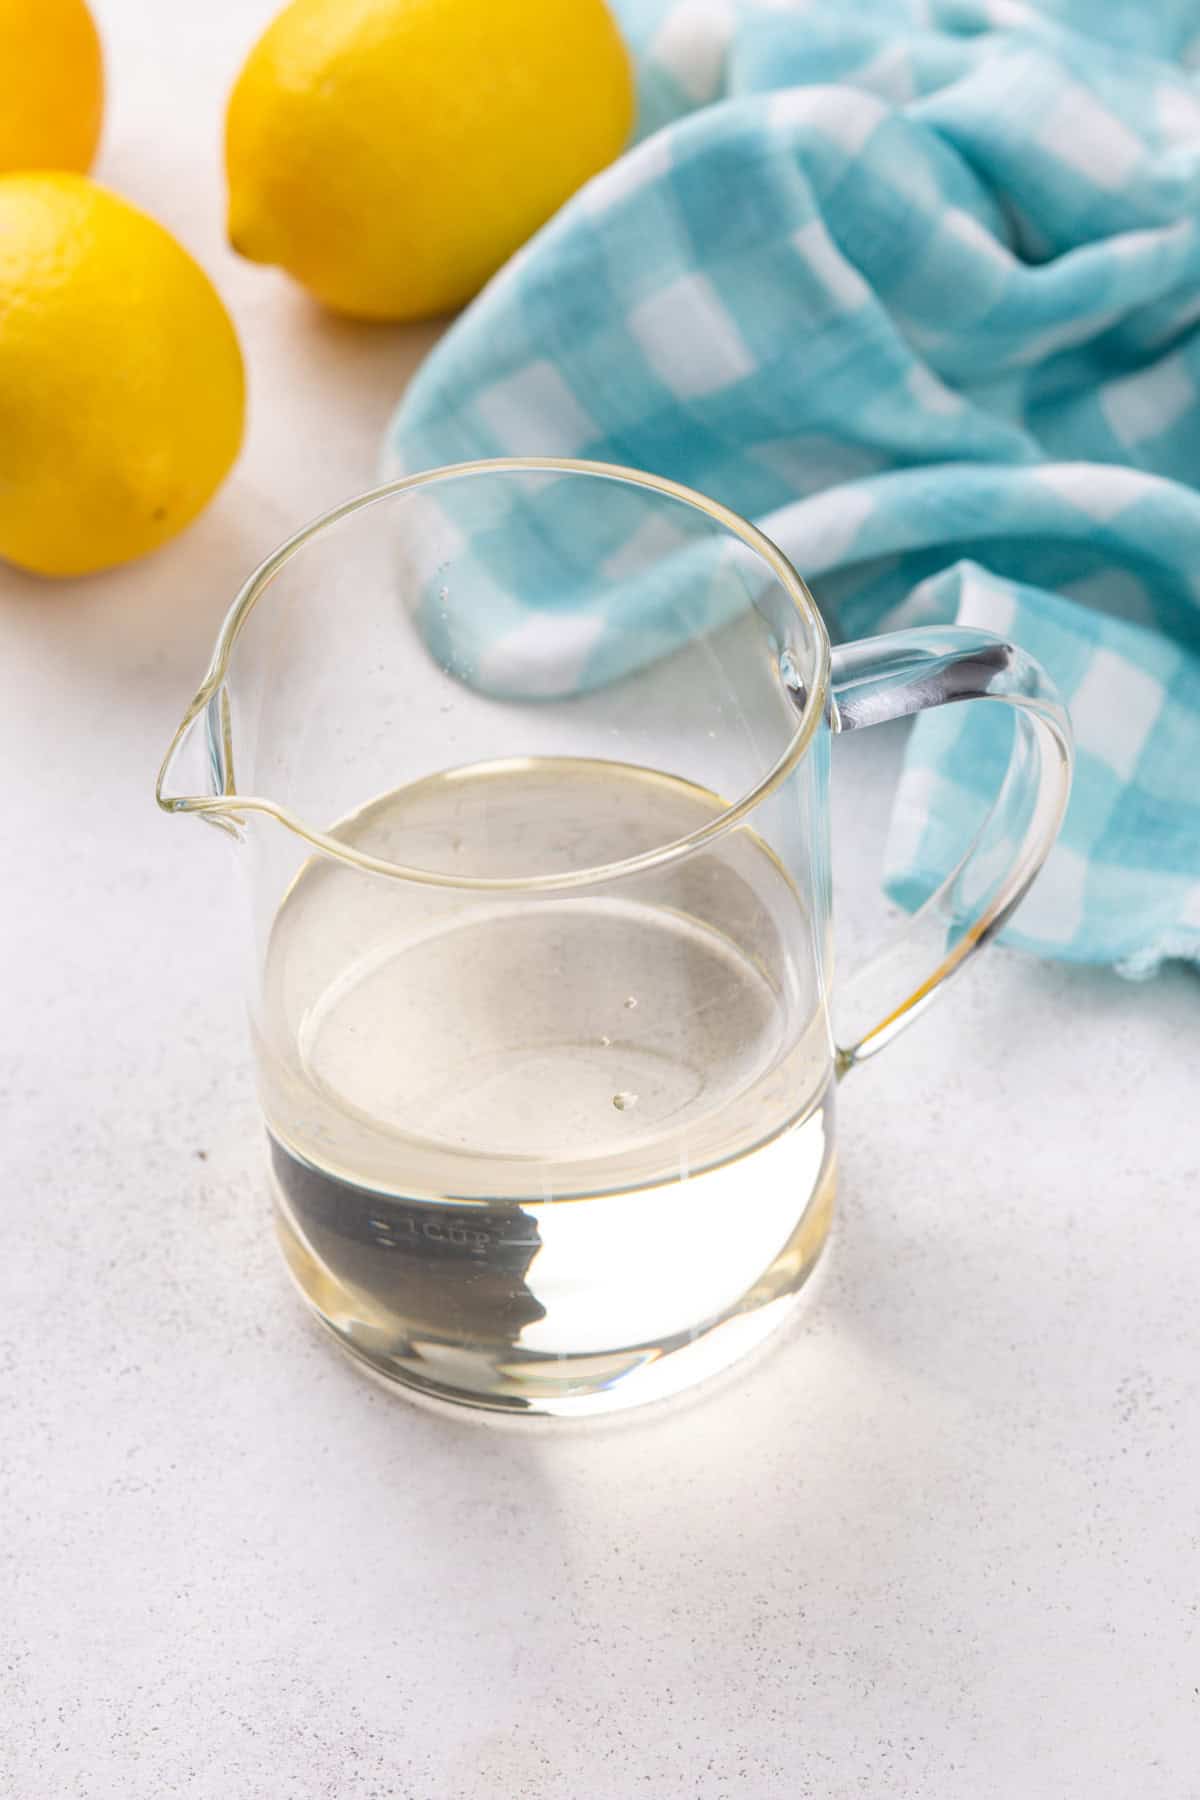 Simple syrup in a small glass pitcher.